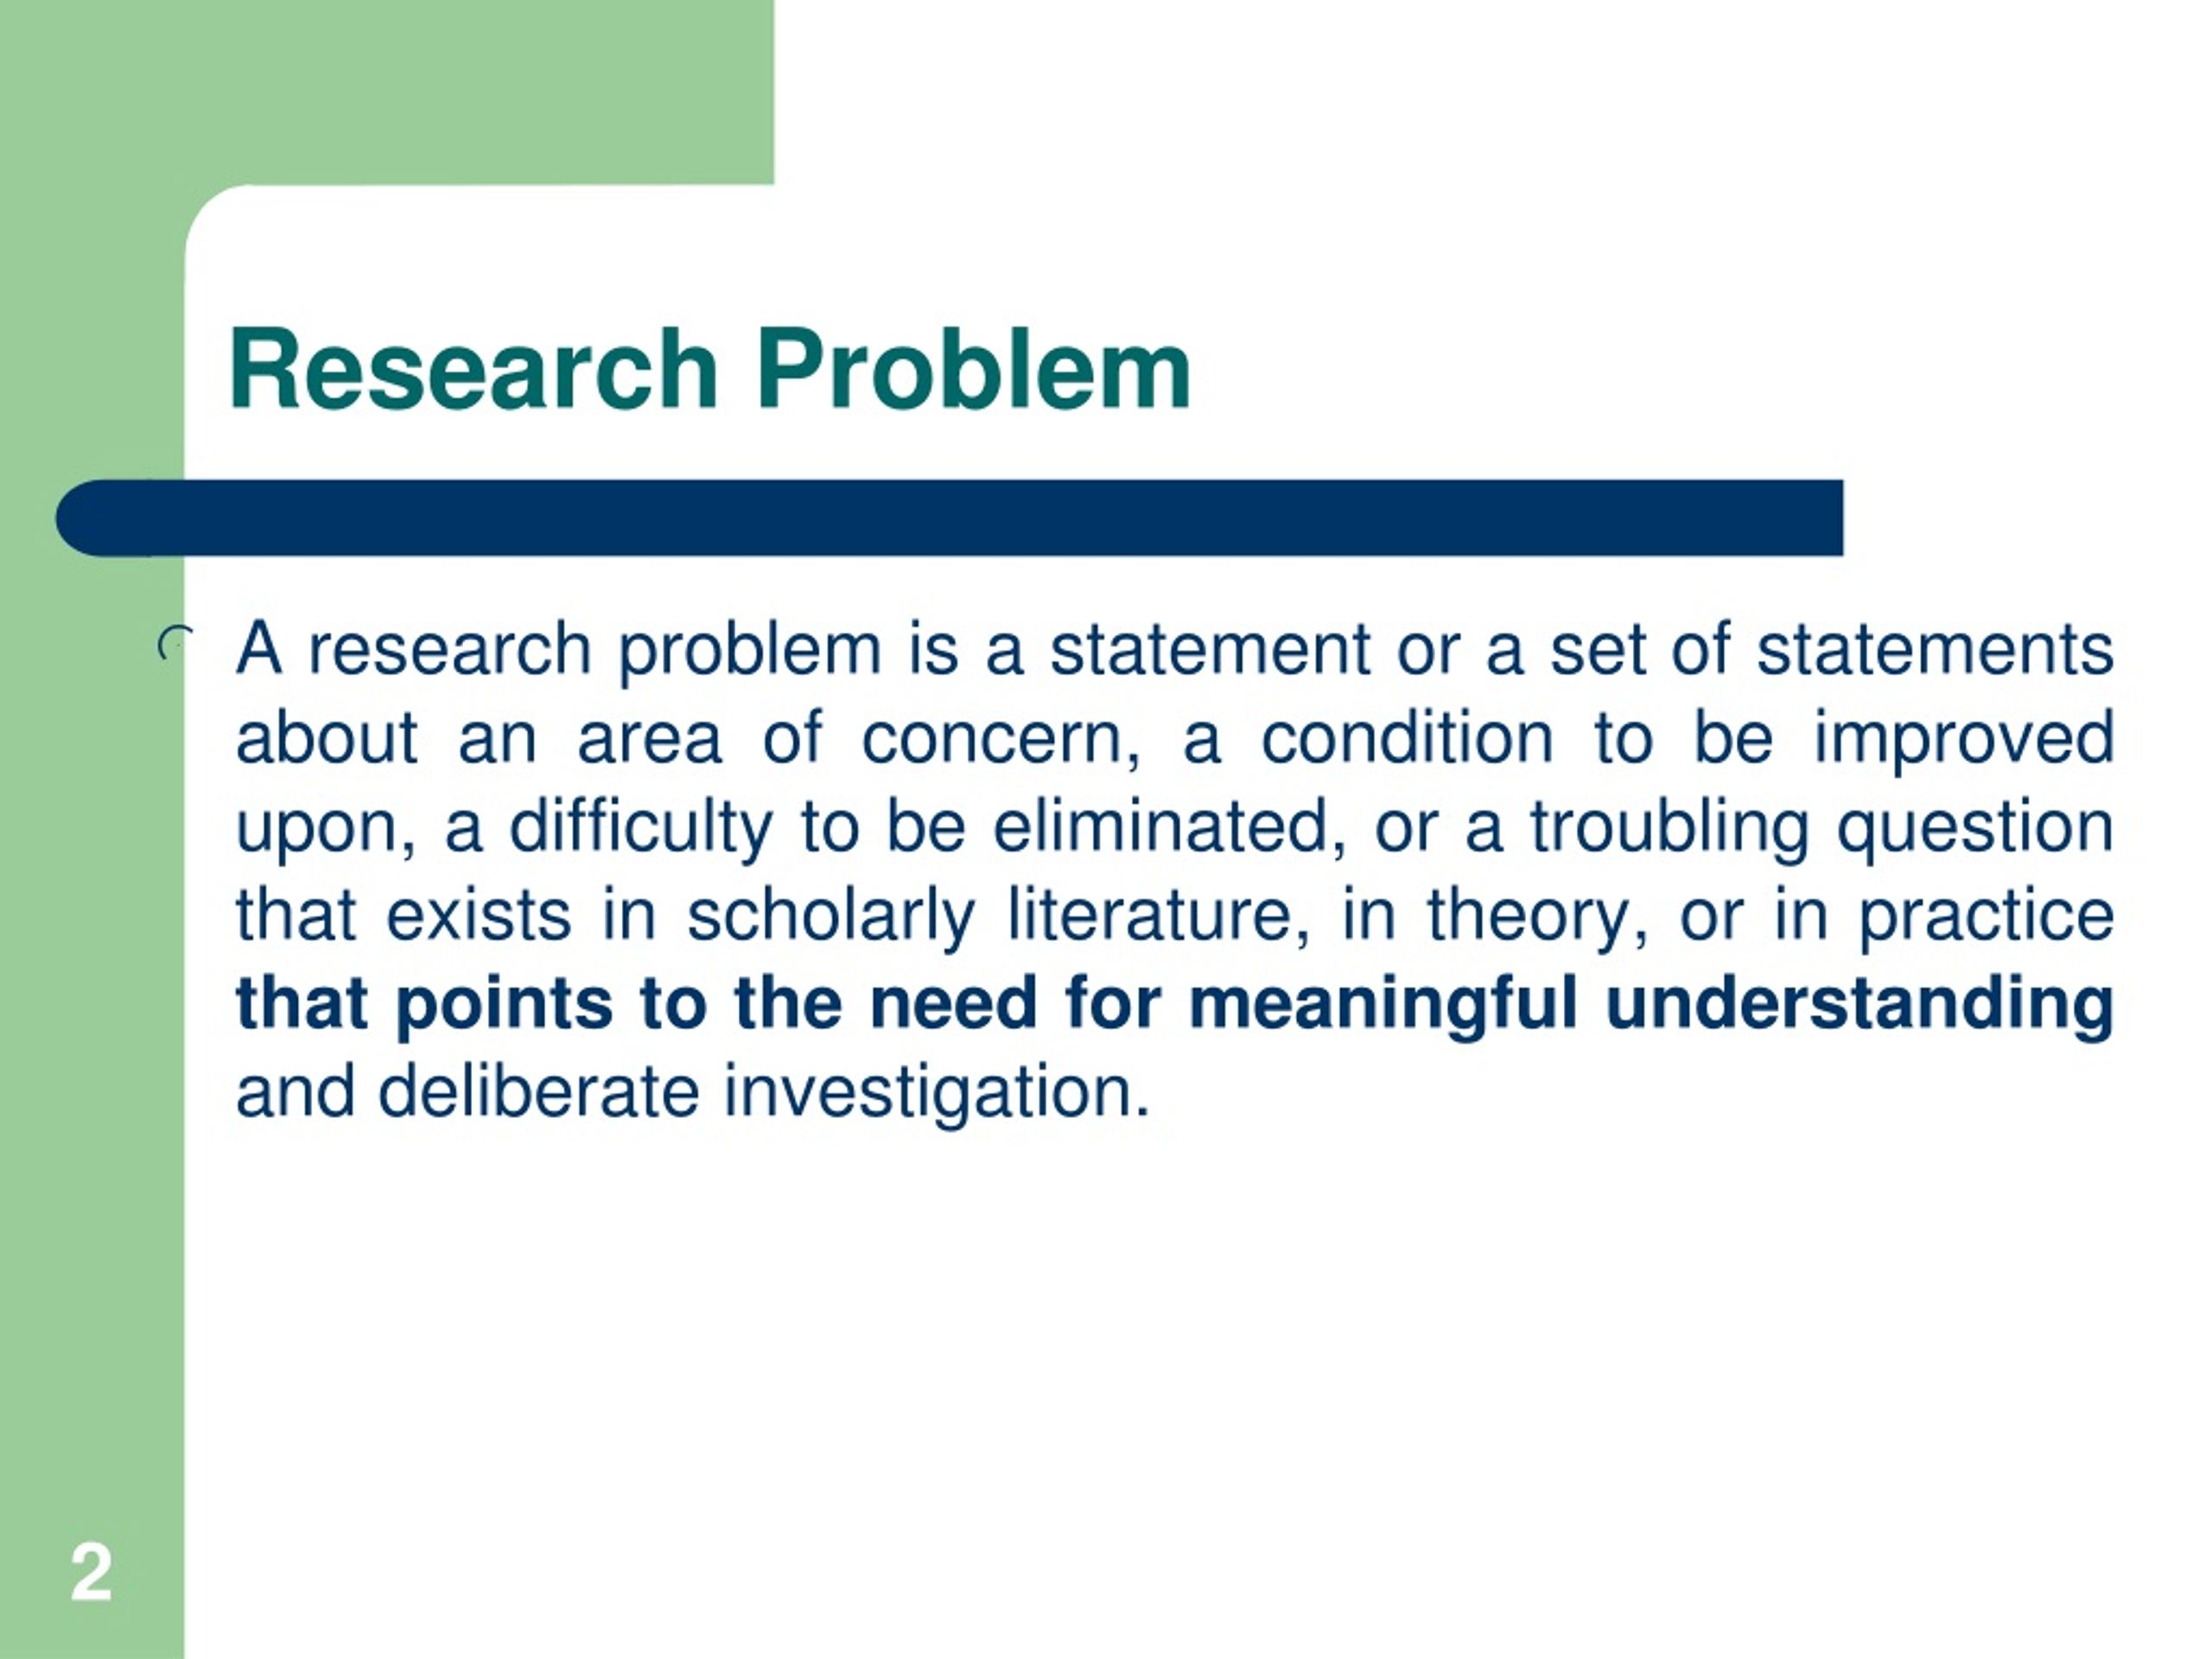 sources of research problem ppt